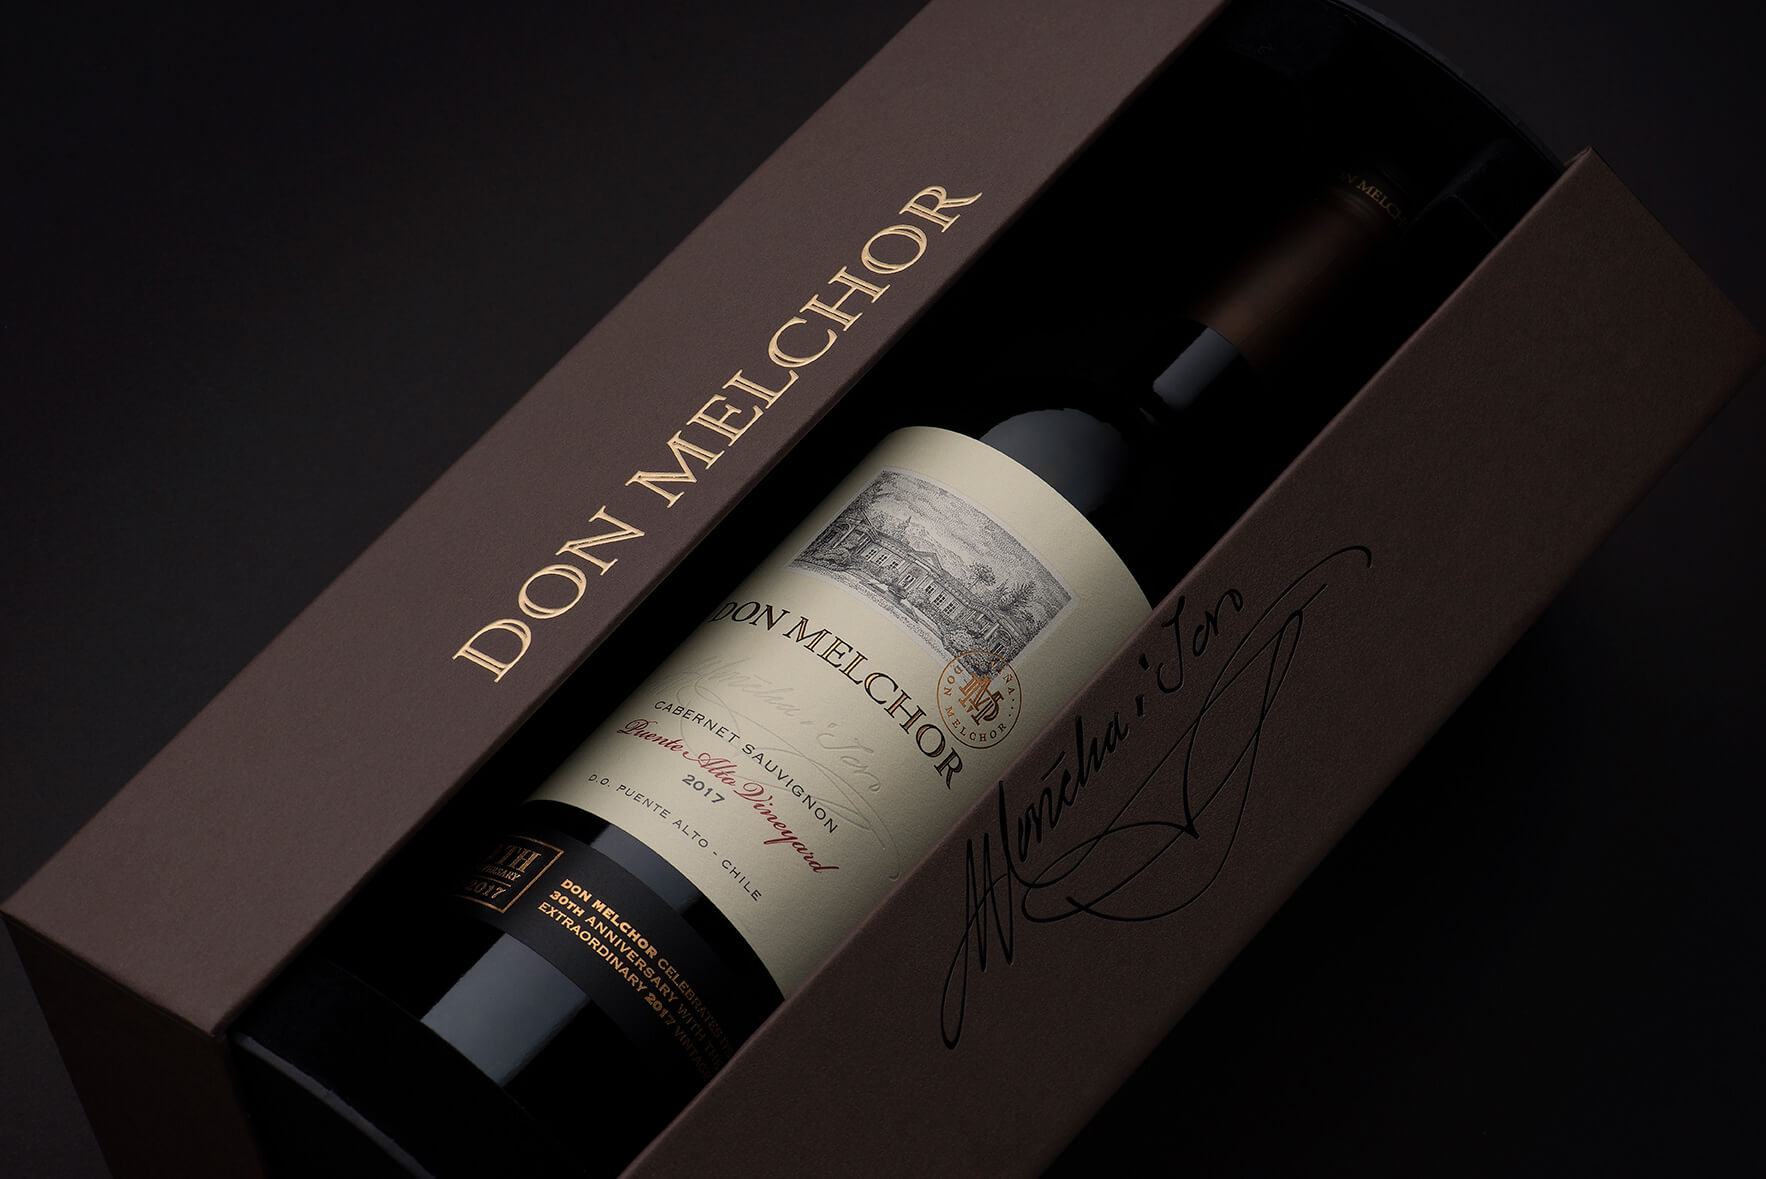 94+ points for Don Melchor in The Wine Advocate